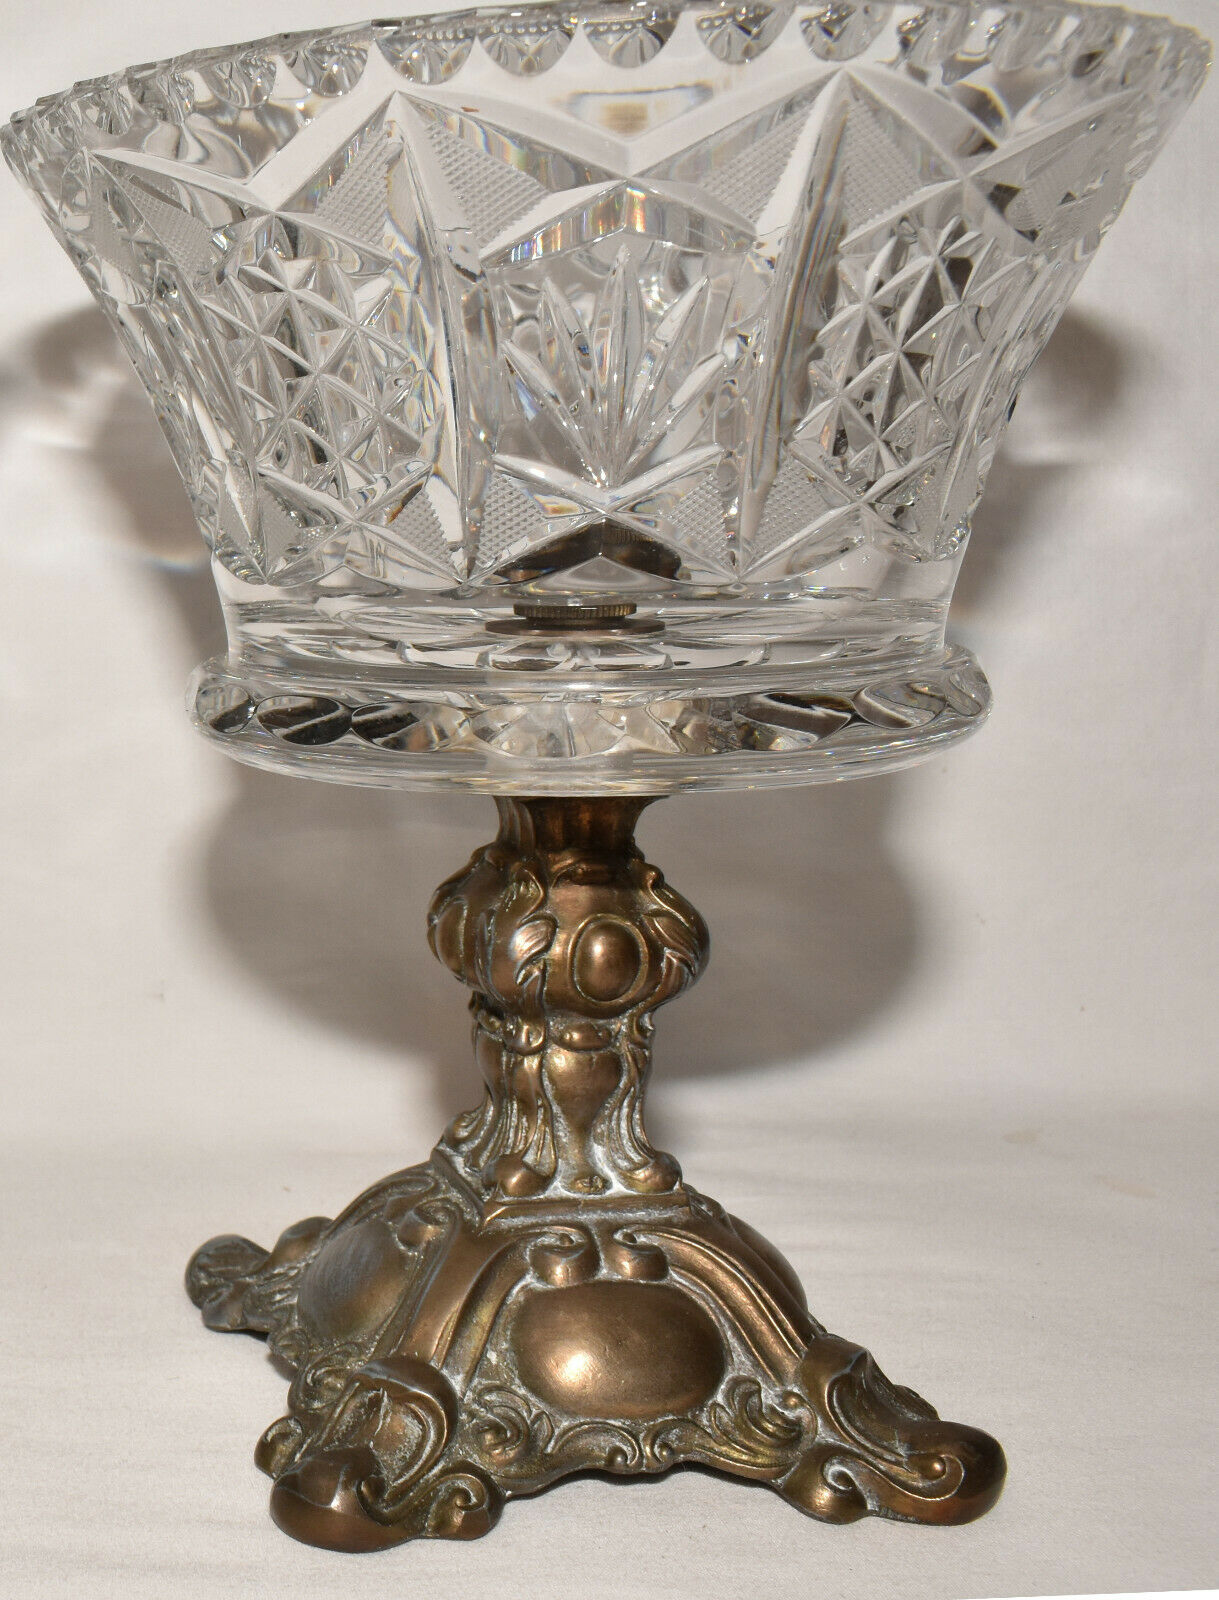 Pair American Brilliant Period Glass Compotes w Brass Base Cut Crystal Open Dish